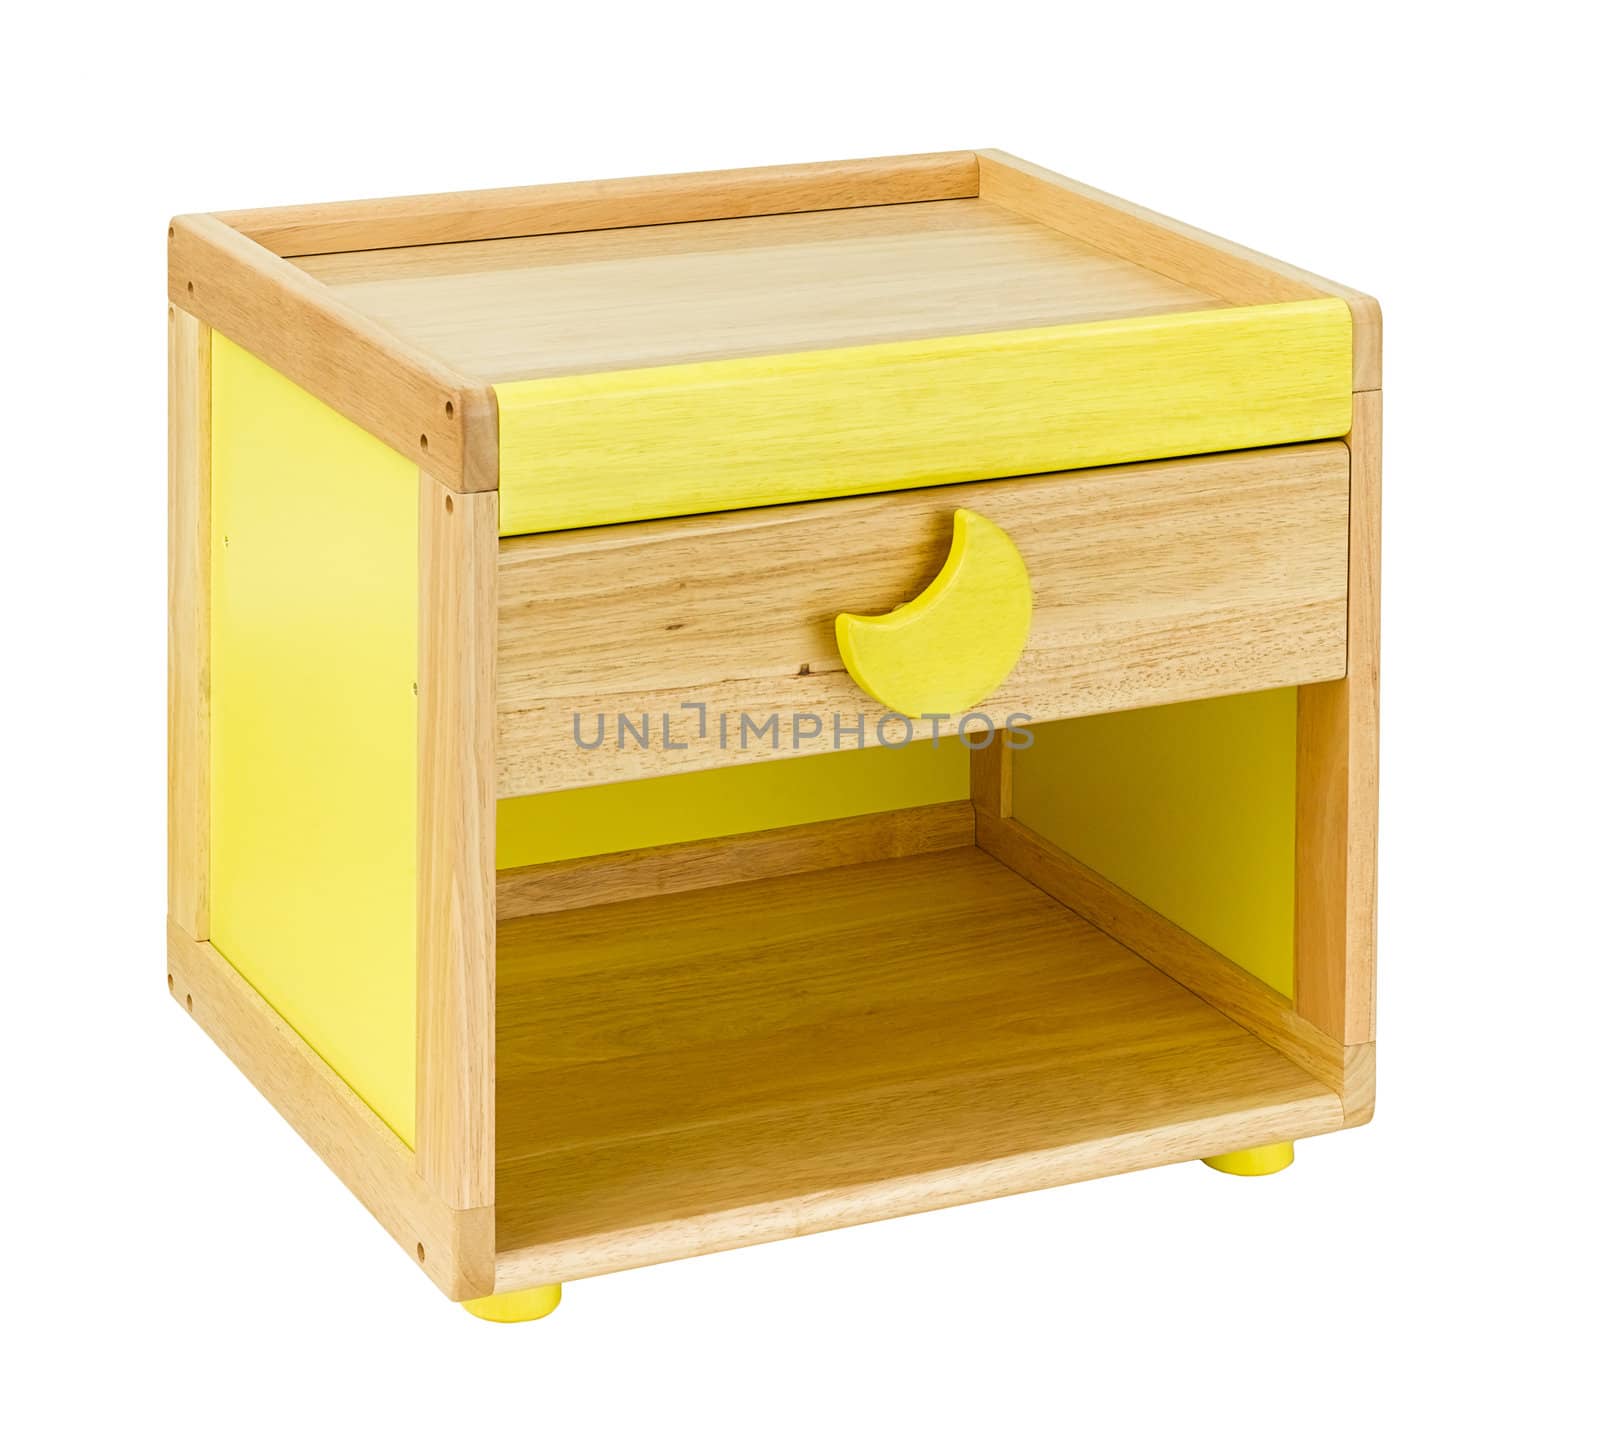 multiple purpose wooden box, it could be use as table drawer or cabinet, little kid can be sit keep toys or play with it